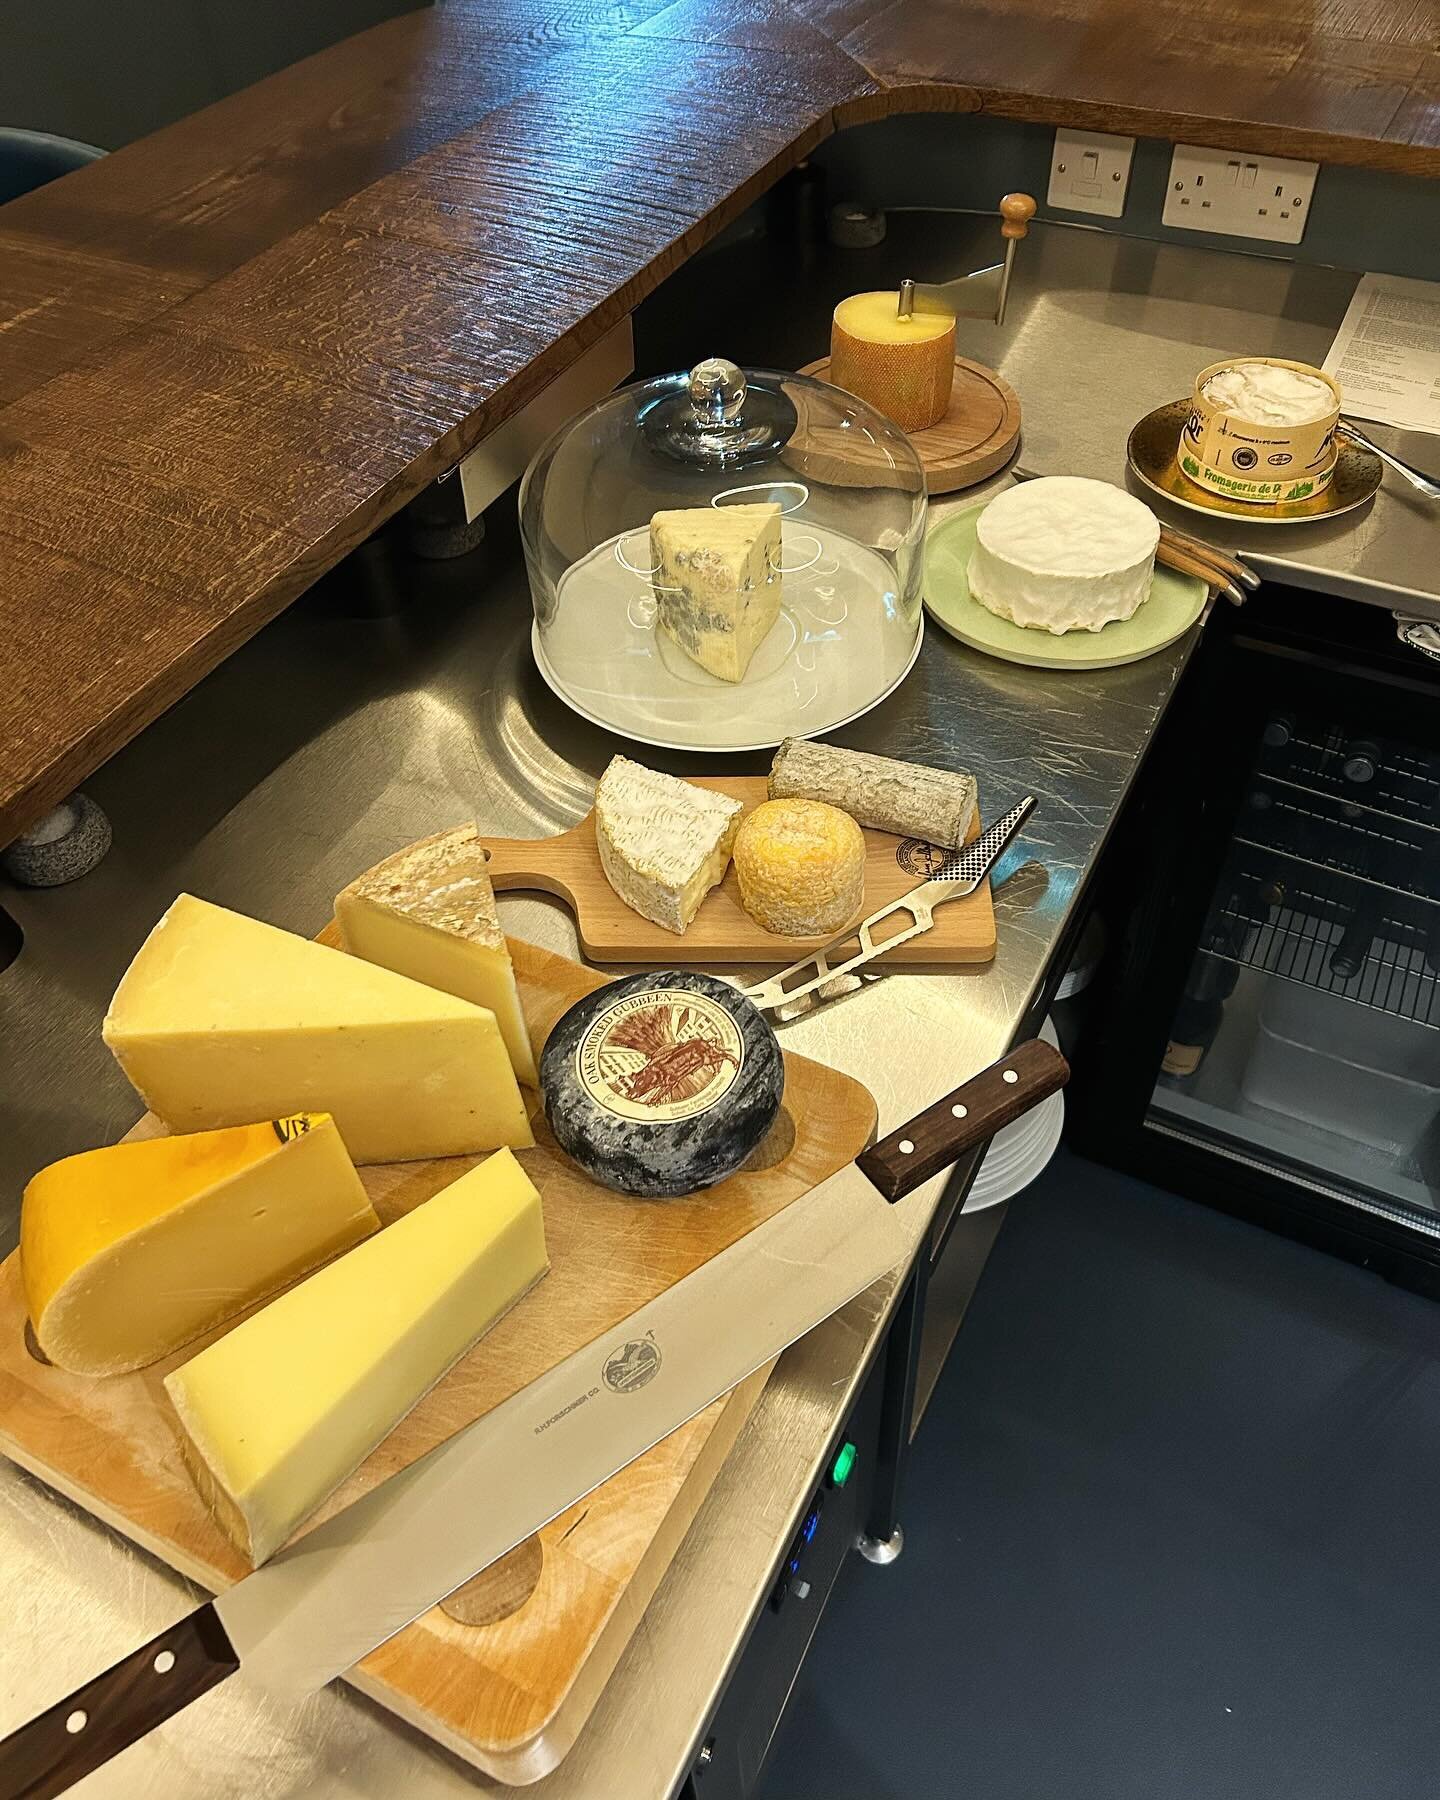 🚨 Cheese, glorious cheese - competition time! 🚨
⠀⠀⠀⠀⠀⠀⠀⠀⠀
It was great fun for us at Hogmanay to host a more casual evening of cheese, wine, cured meats and a few other bites. We were particularly pleased with this selection of our 12 favourite che